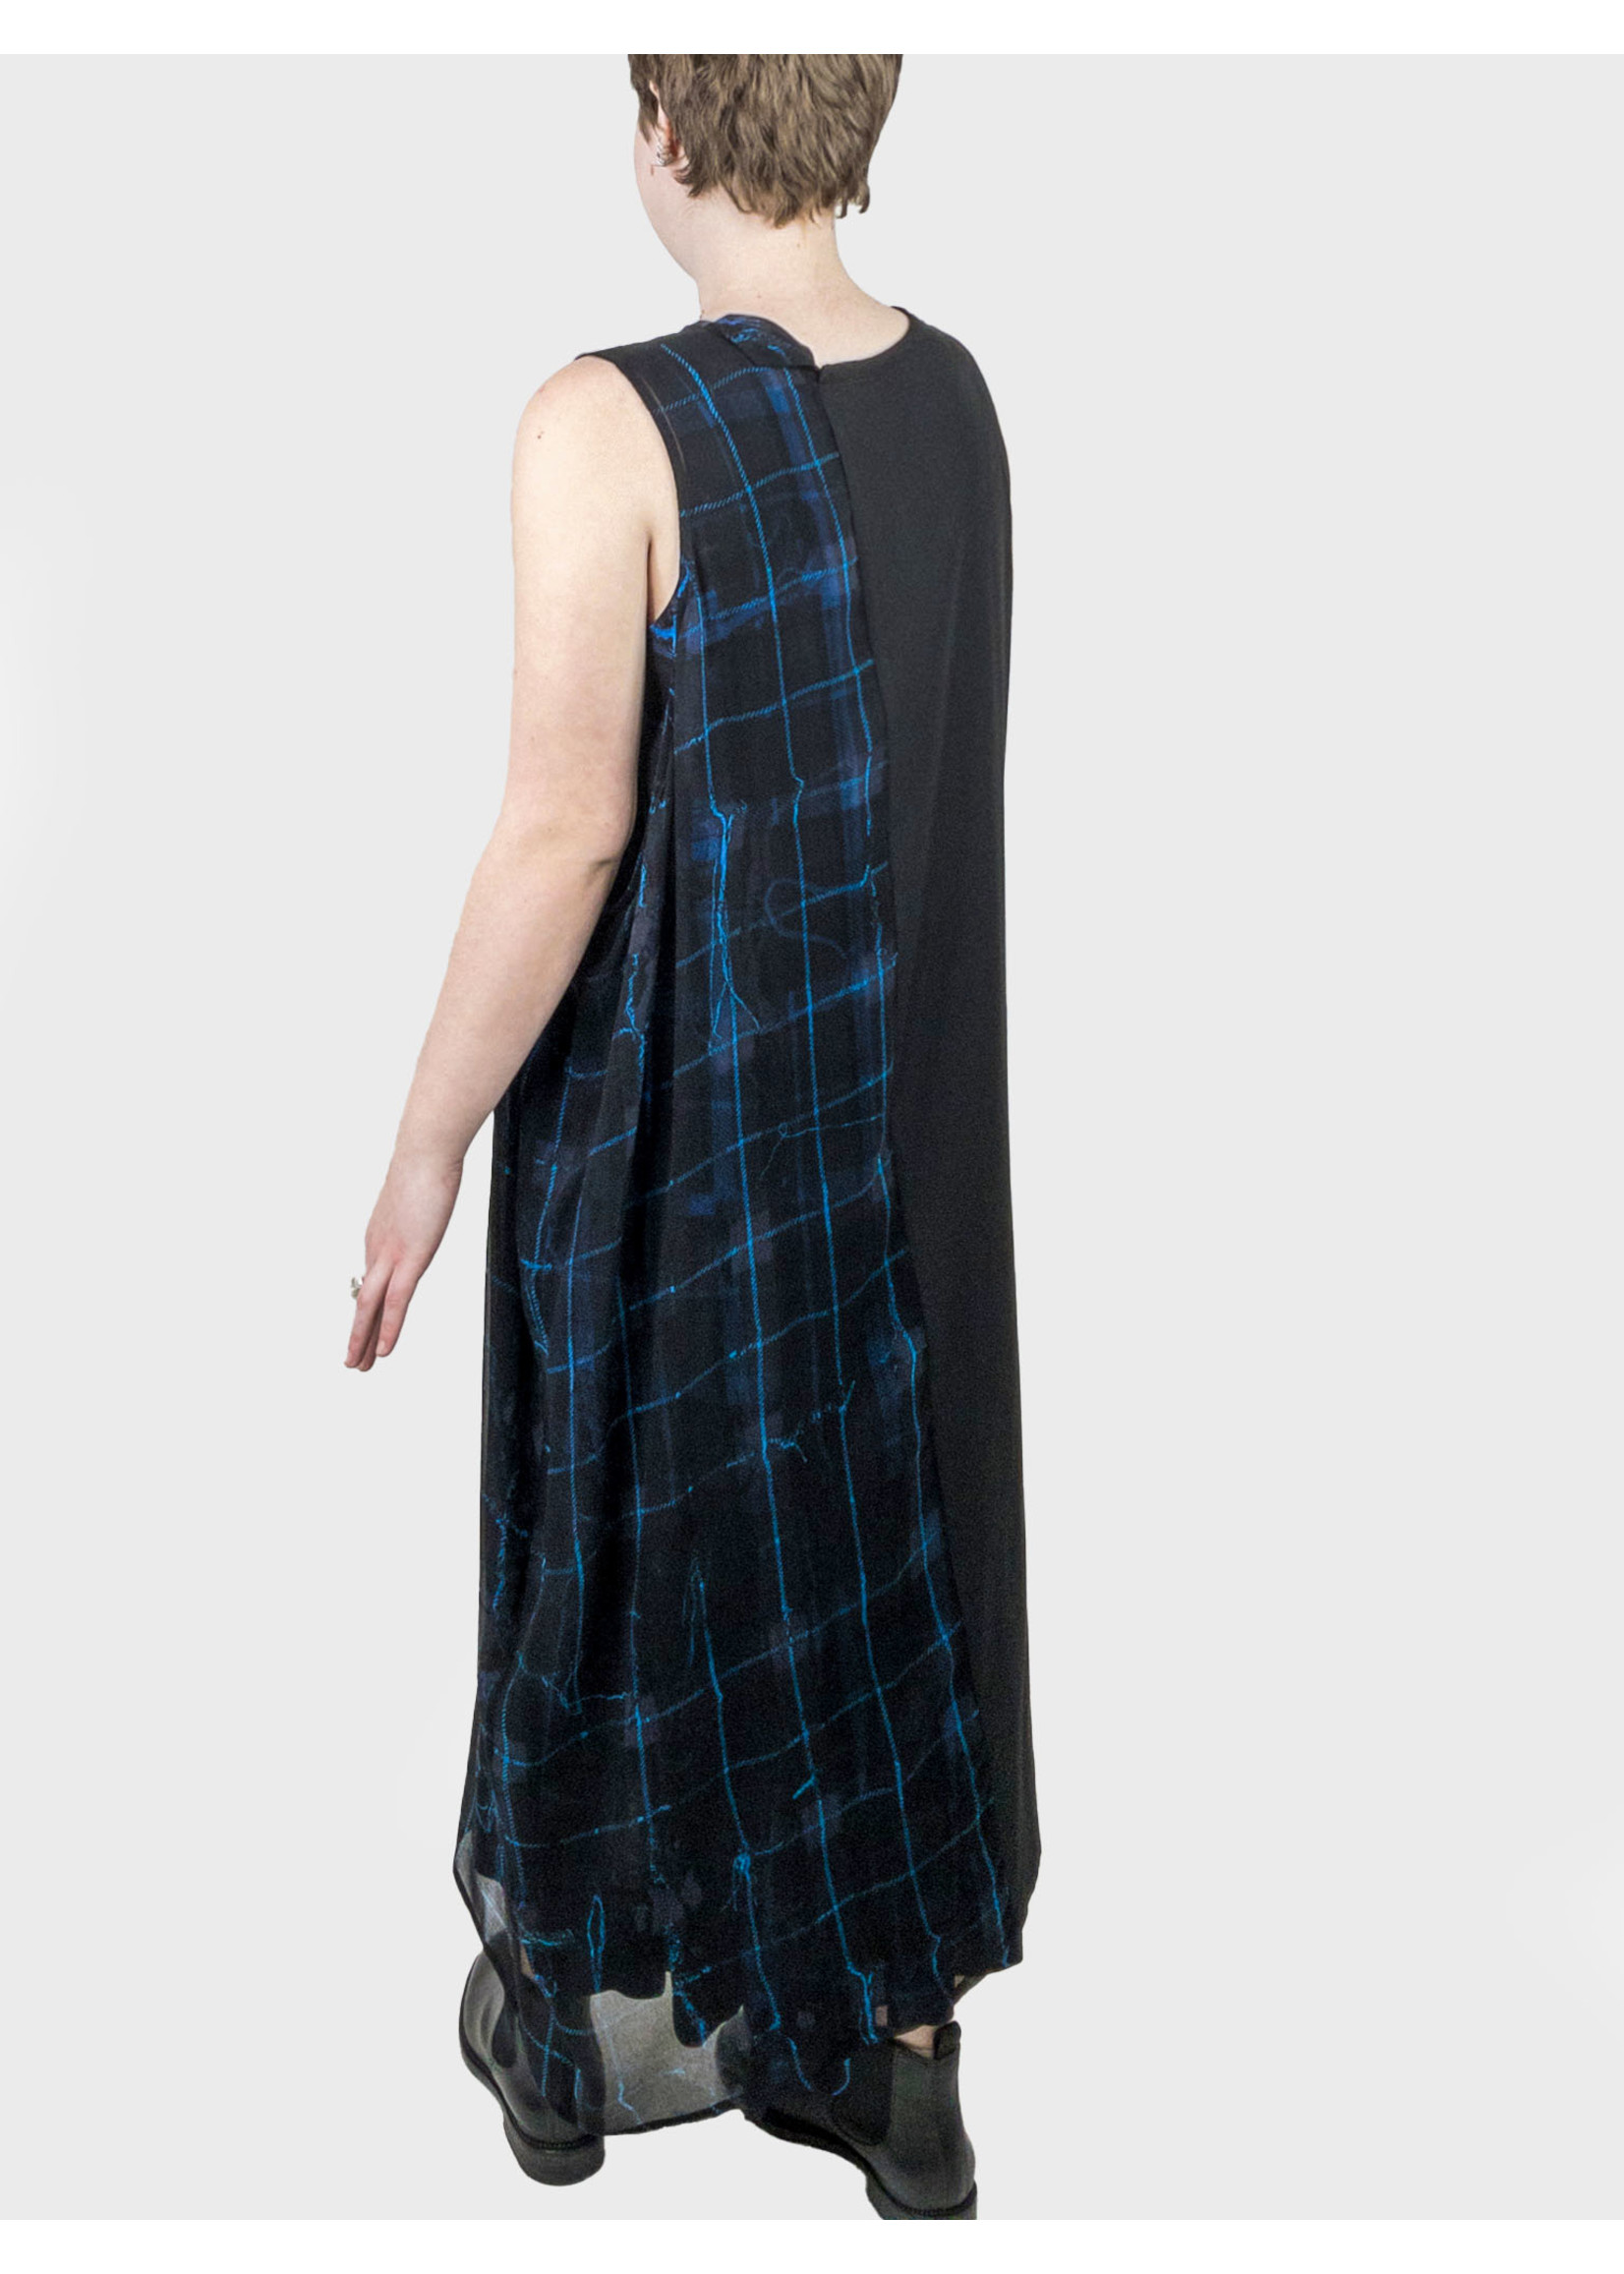 Y's Check Left Layered Dress